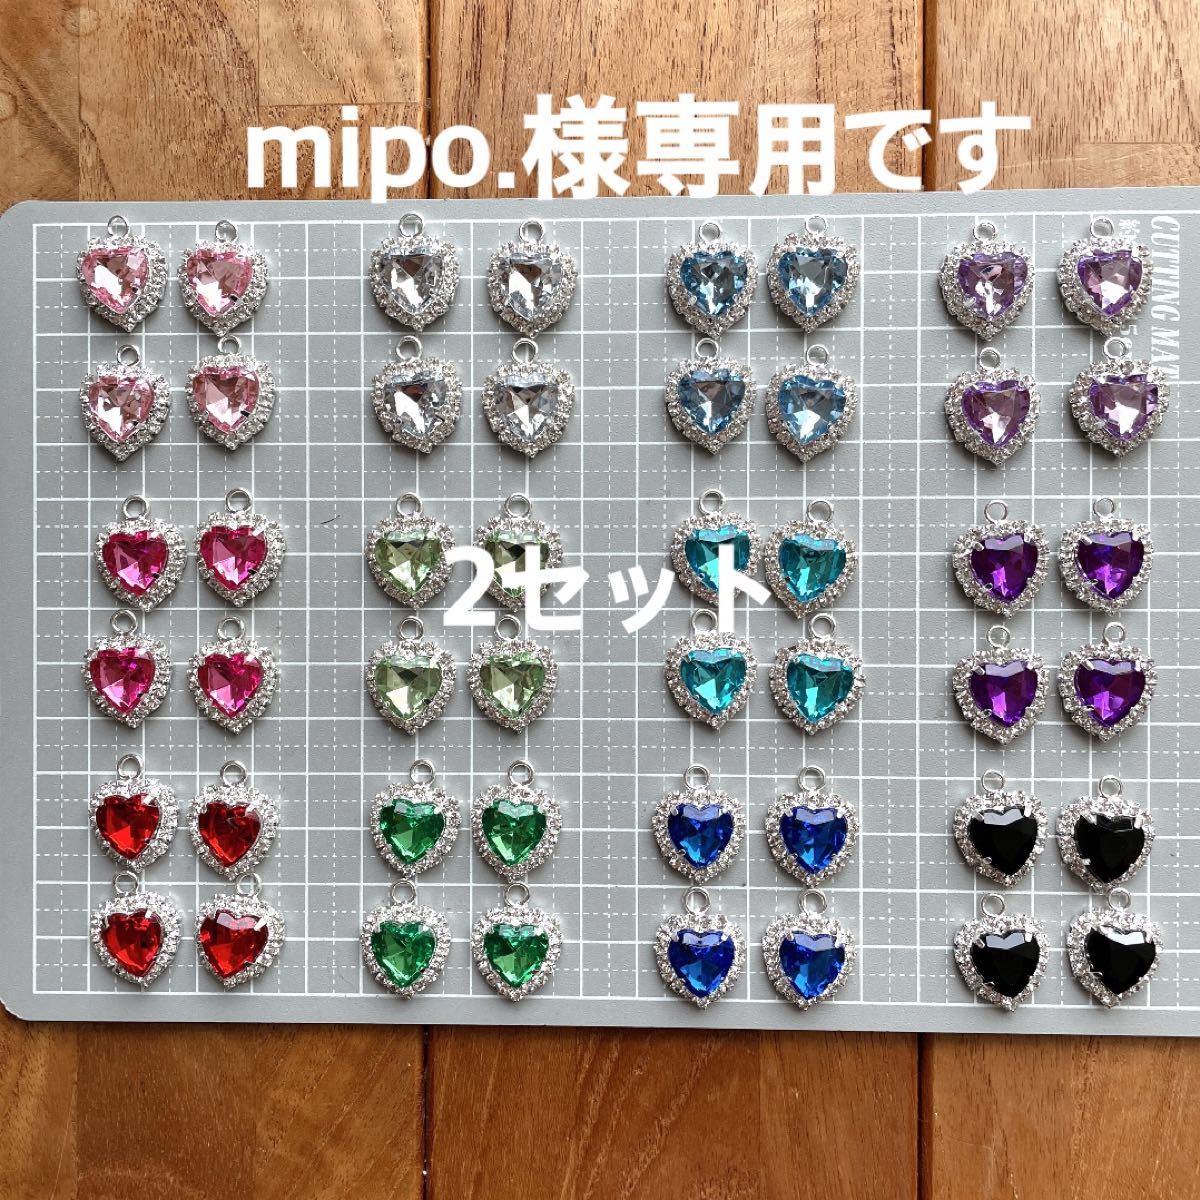 mipo.様専用です